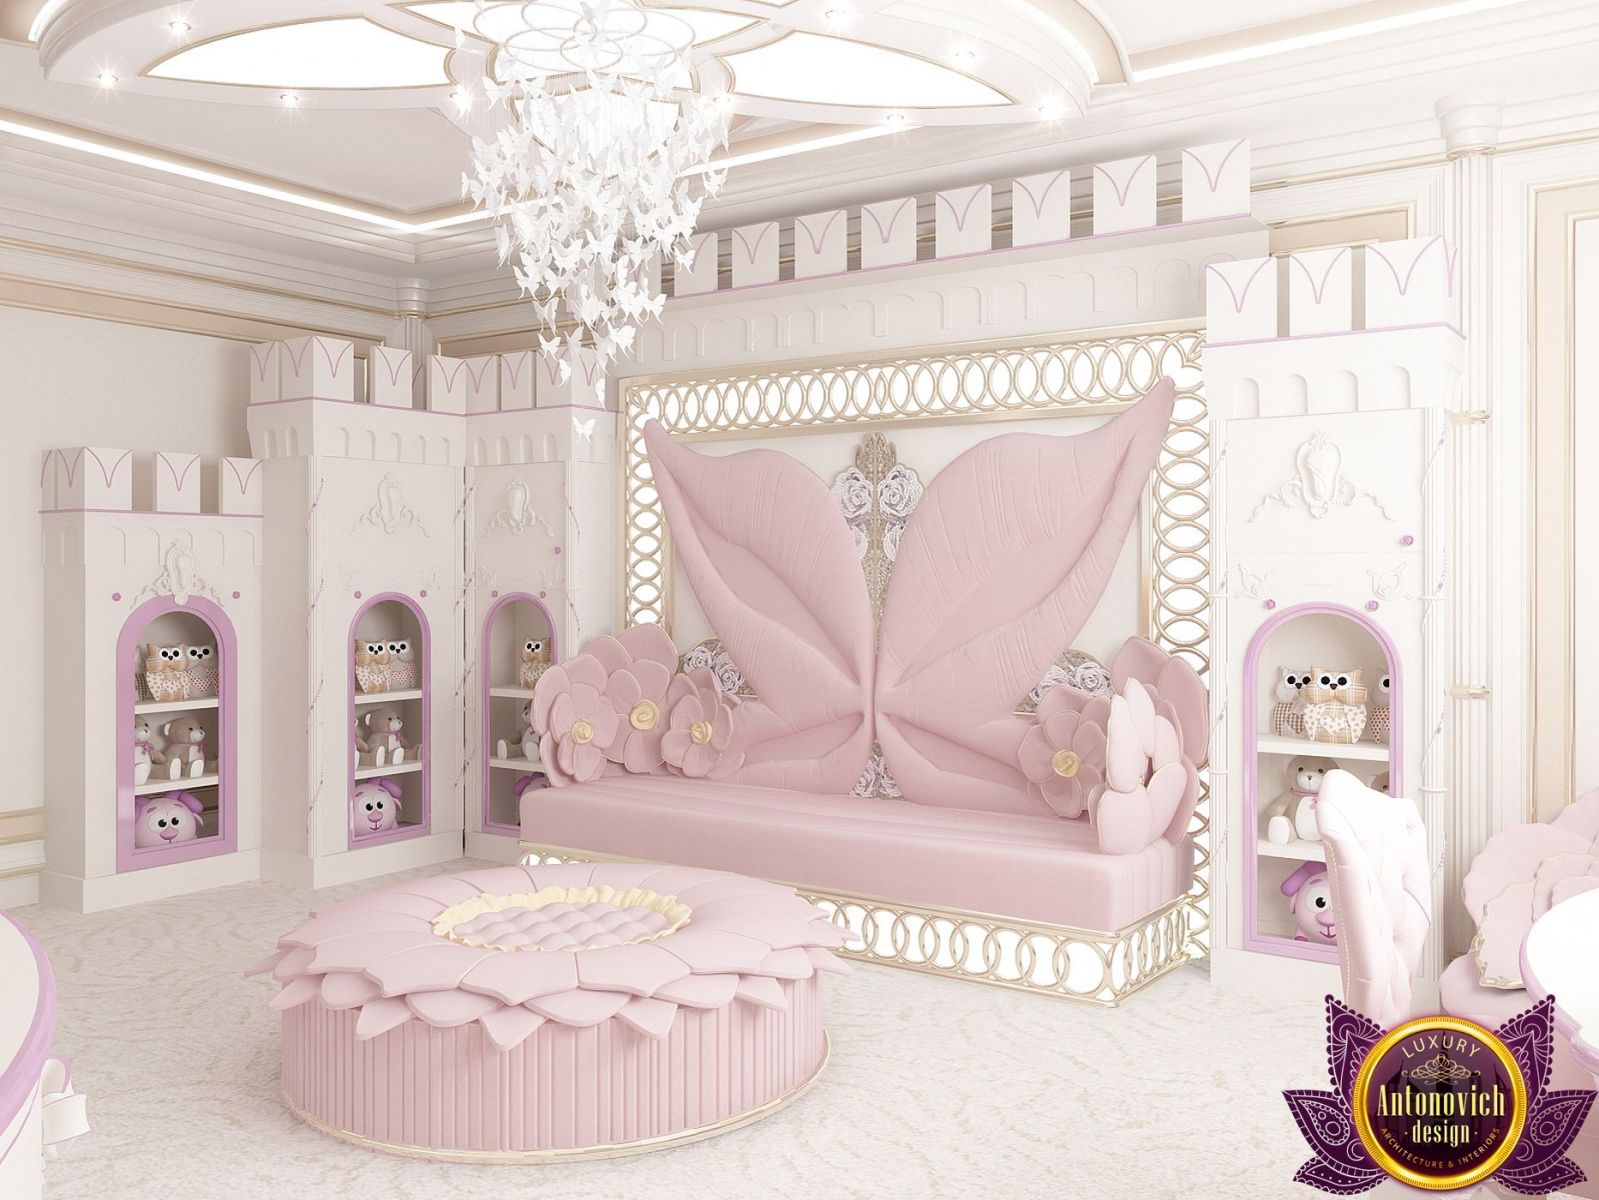 Sophisticated girl's bedroom with a touch of glamour